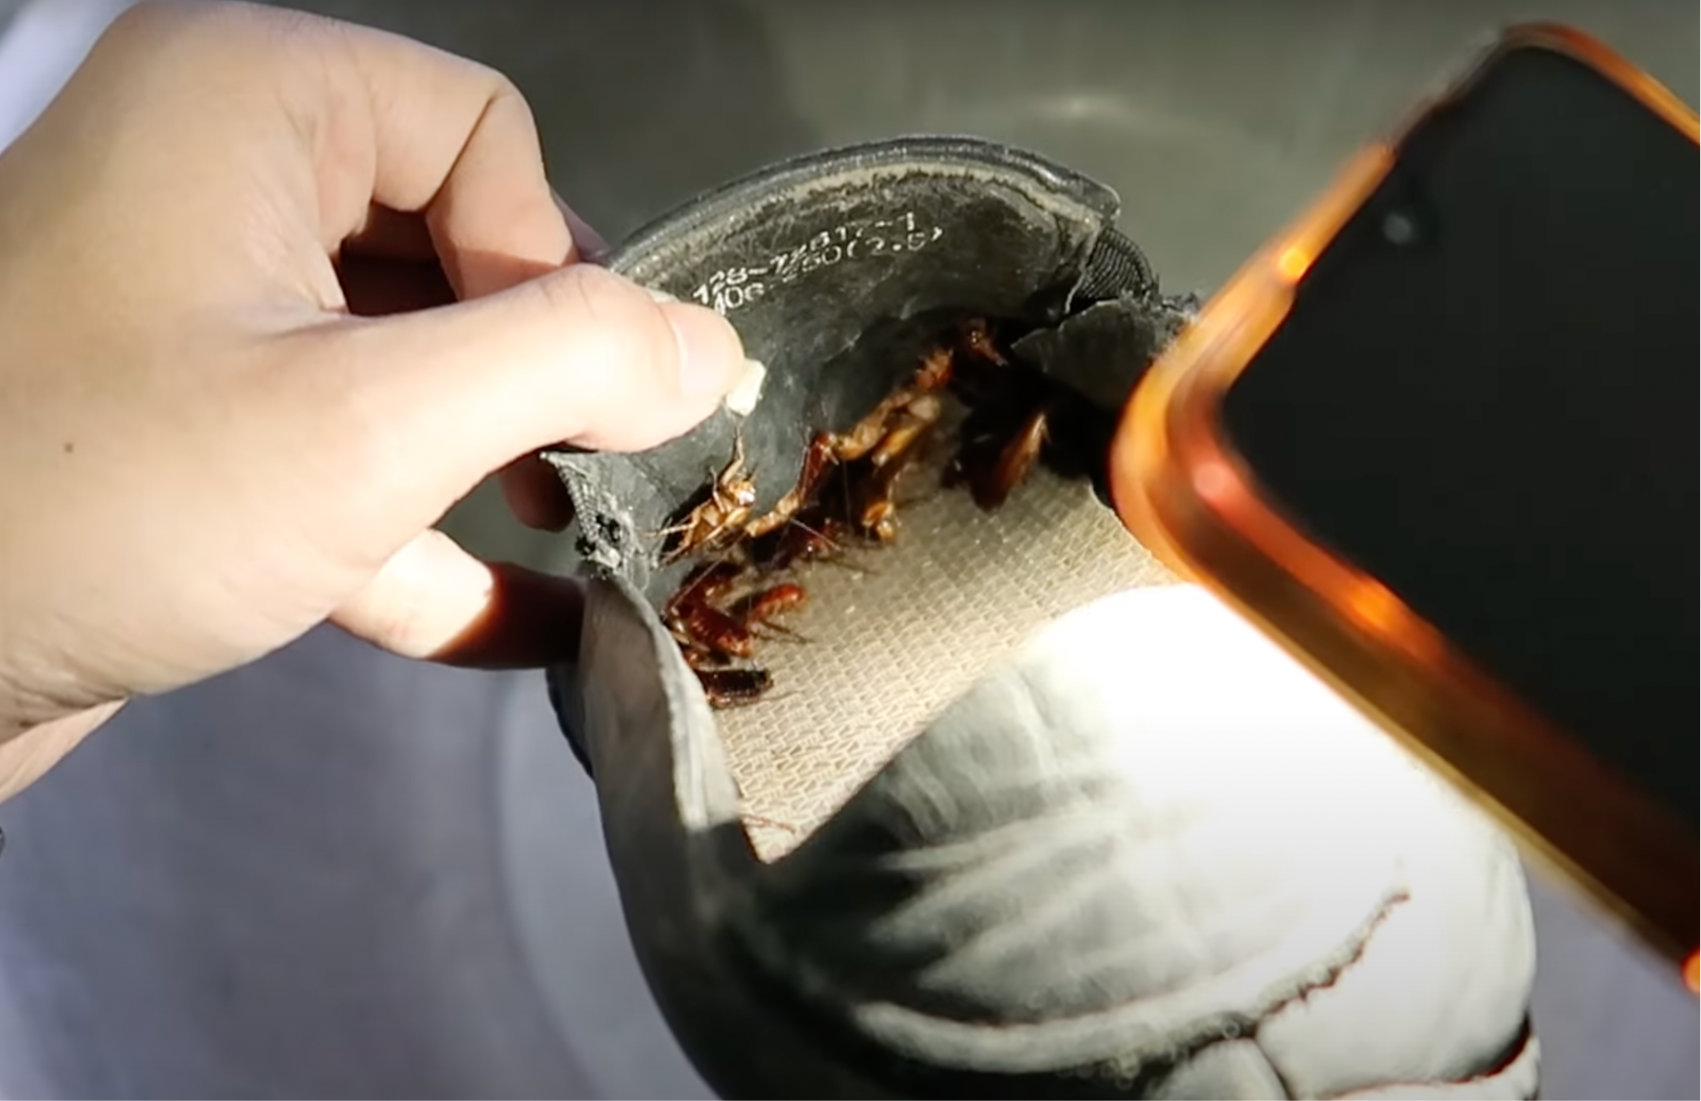 An image of cockroach nest in a shoe